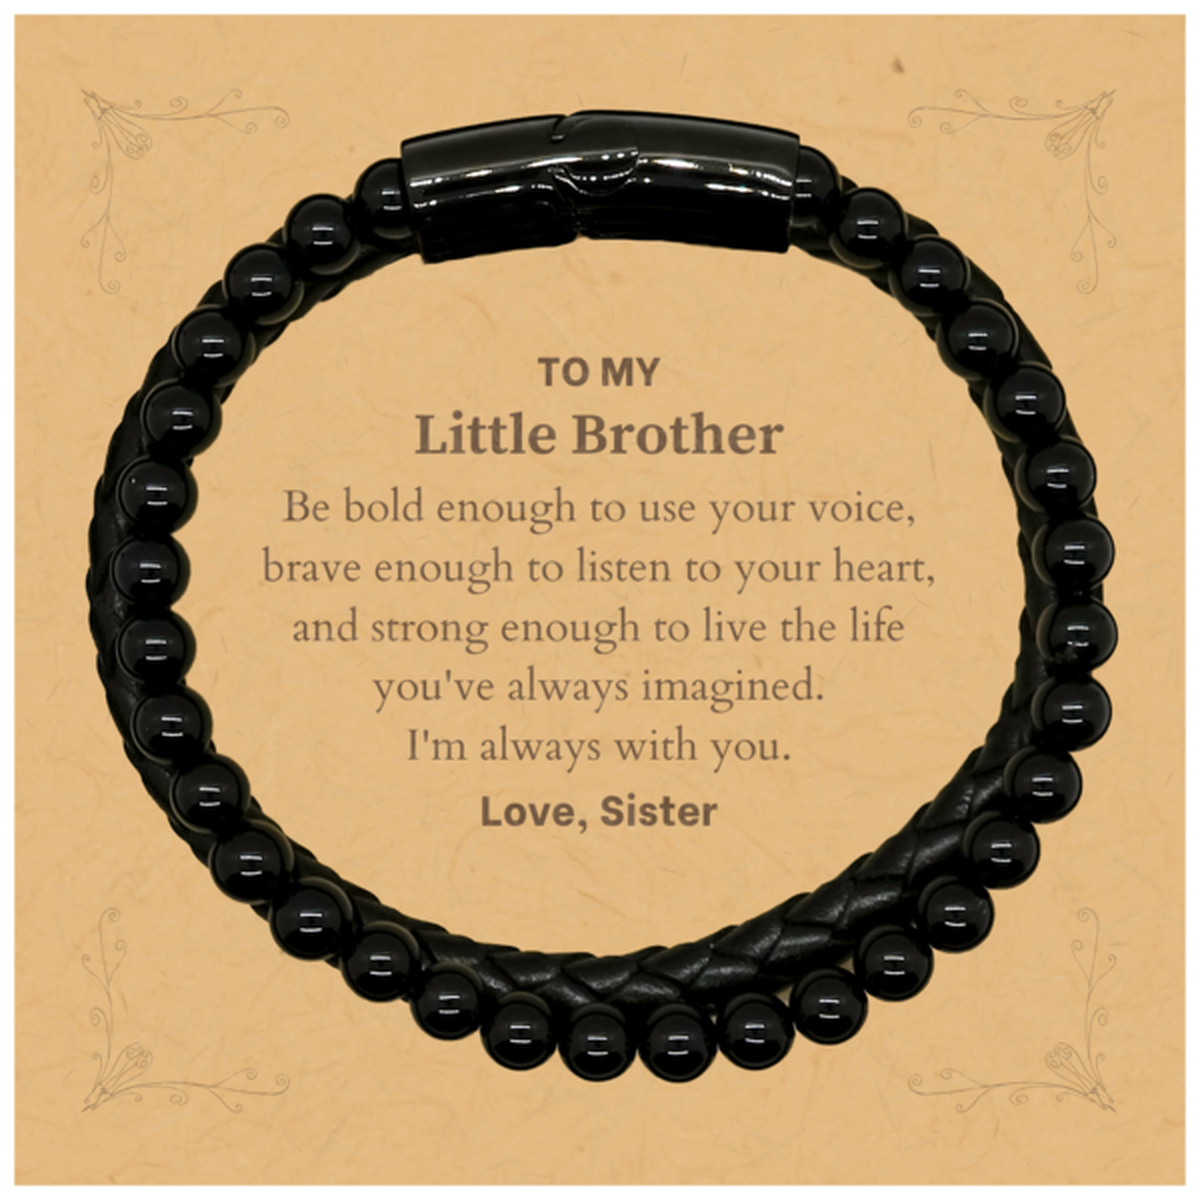 Keepsake Little Brother Stone Leather Bracelets Gift Idea Graduation Christmas Birthday Little Brother from Sister, Little Brother Be bold enough to use your voice, brave enough to listen to your heart. Love, Sister